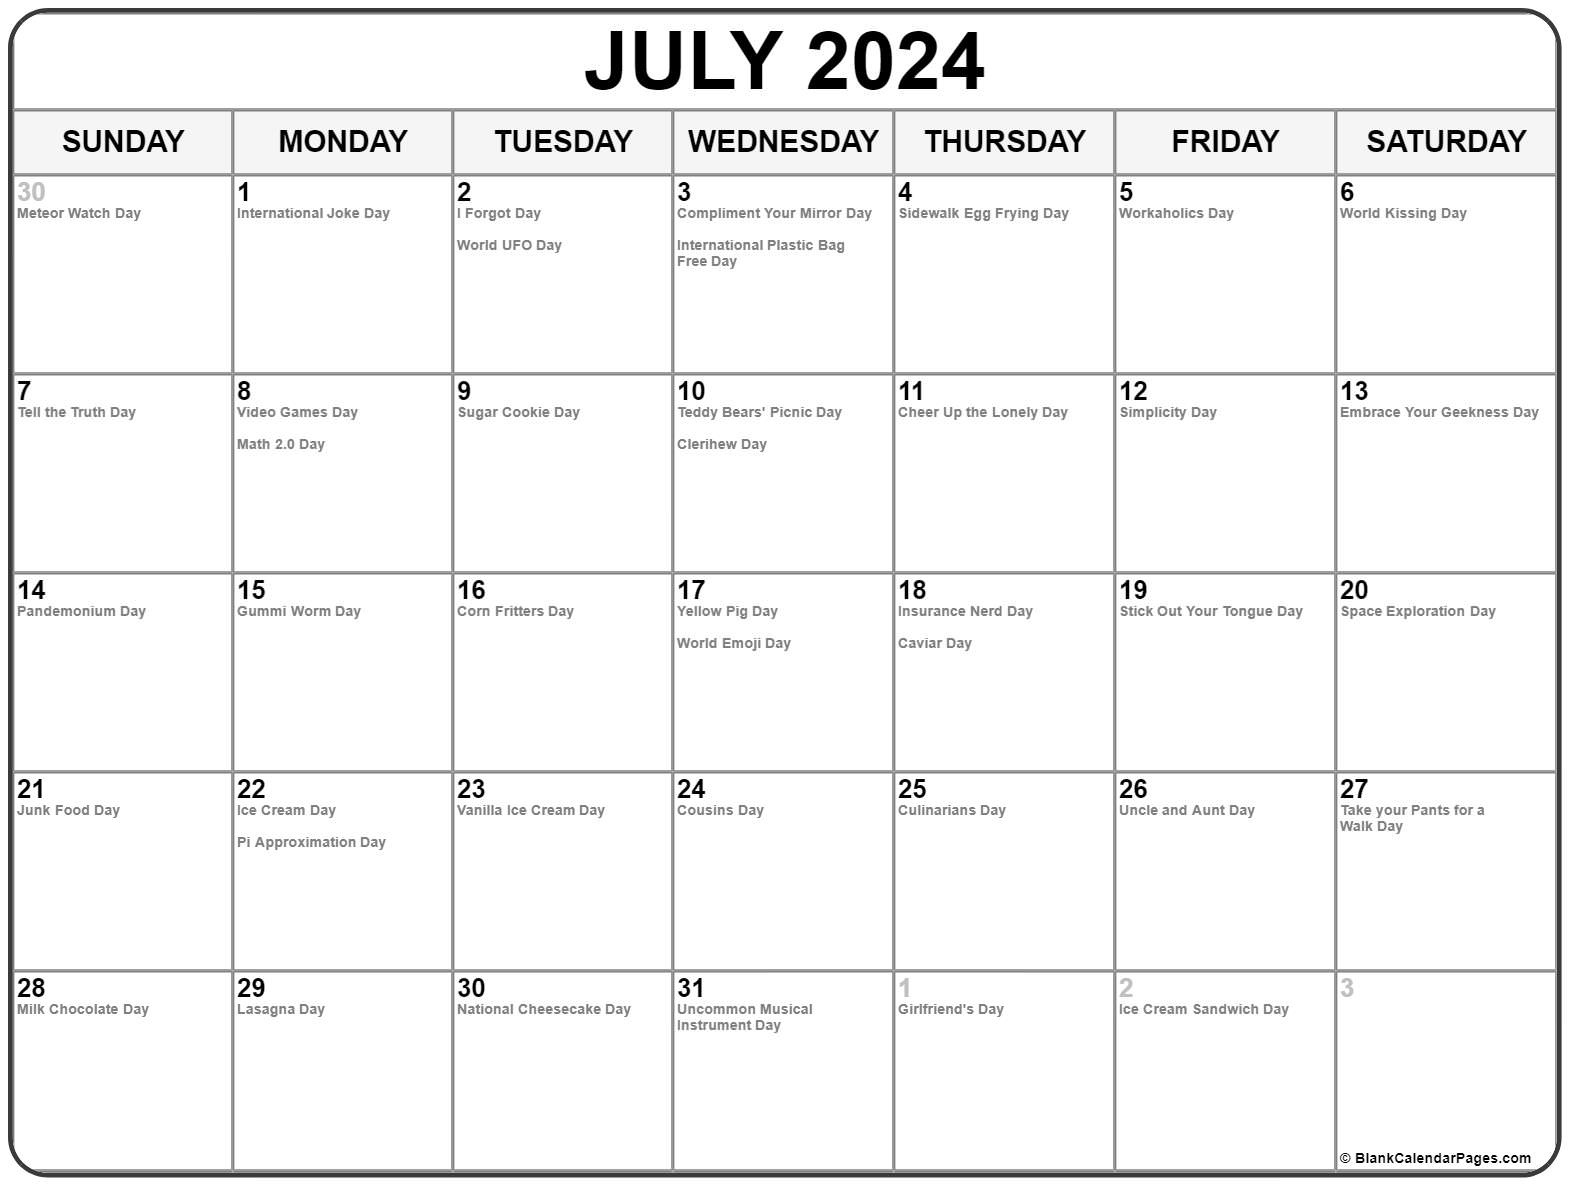 July 2024 With Holidays Calendar within July 29th Holiday Calendar 2024